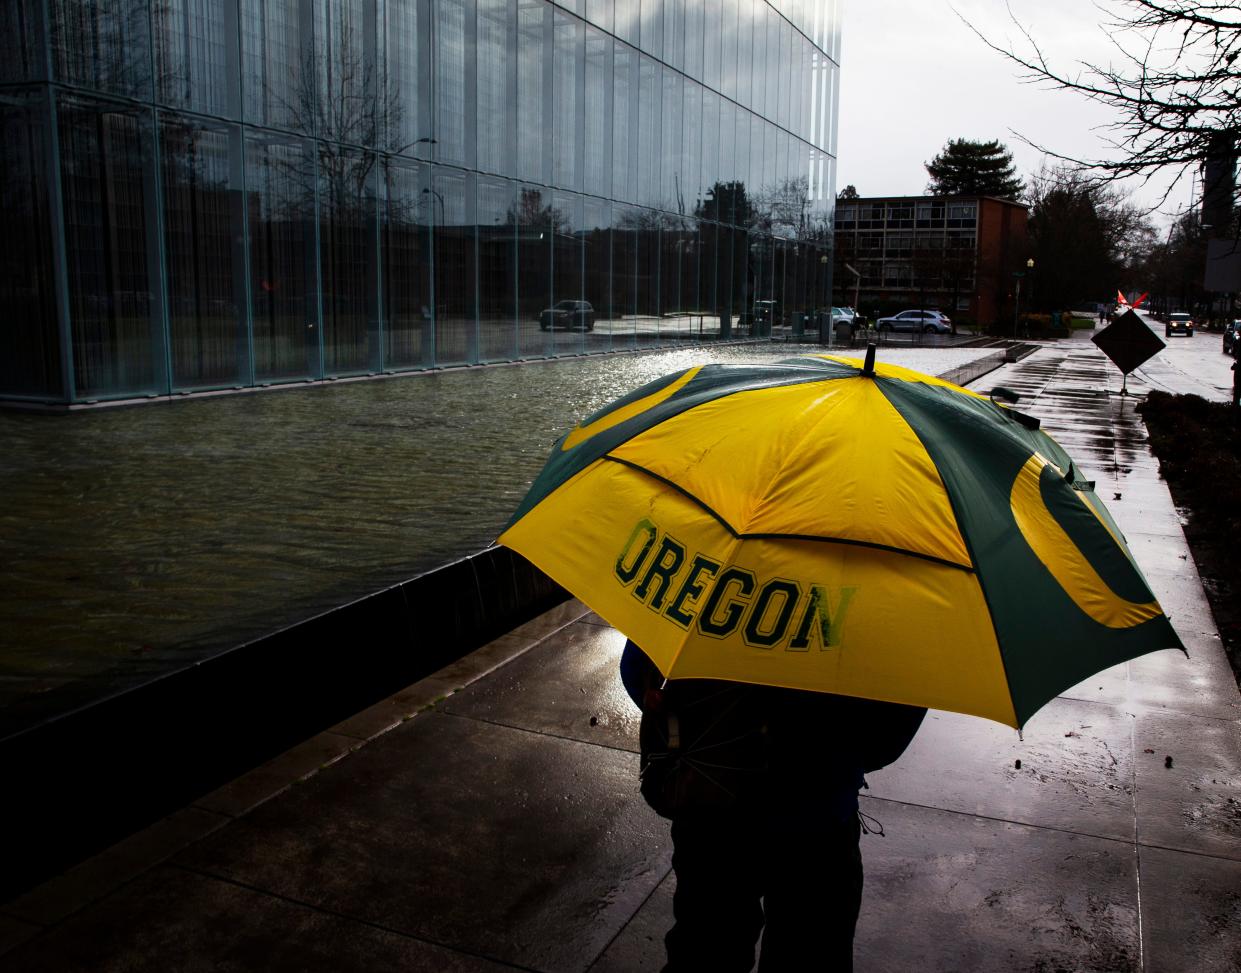 Rain falls on a gray day in Oregon as a passerby to the John E. Jaqua Center for Student Athletes on the University of Oregon campus shields himself from the elements.